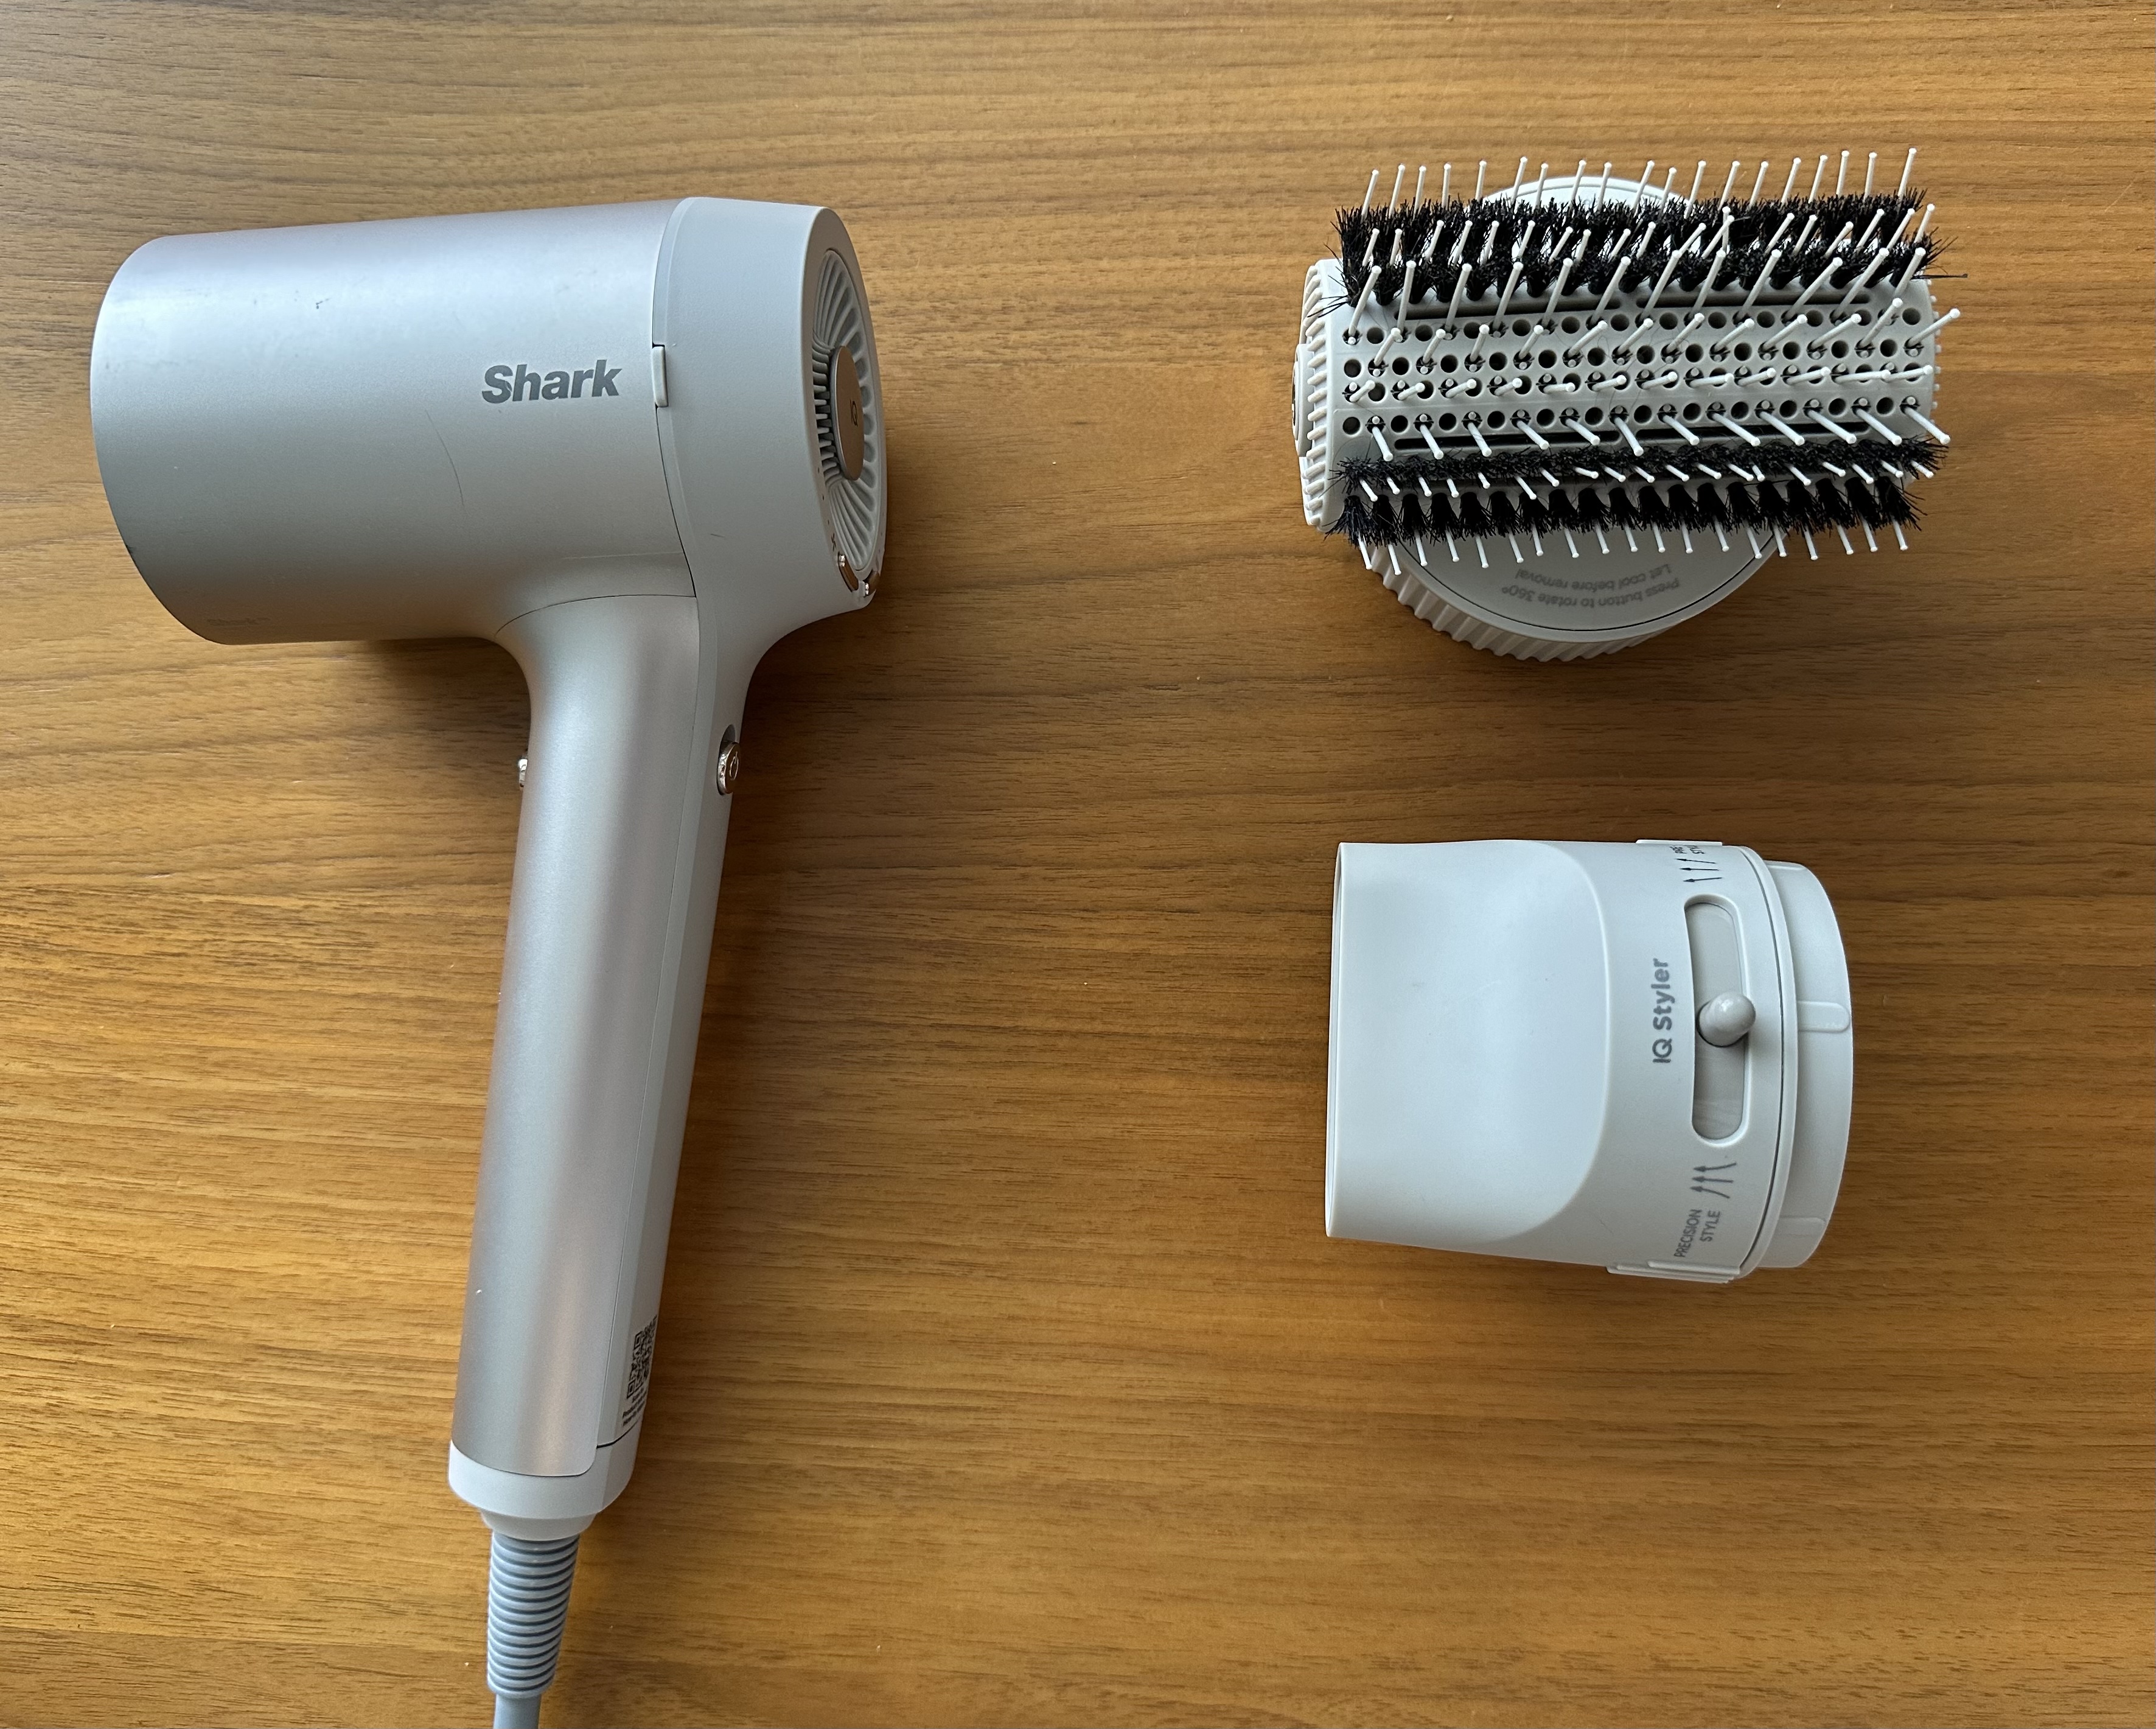 shark hyperair IQ hair dryer with styling attachments